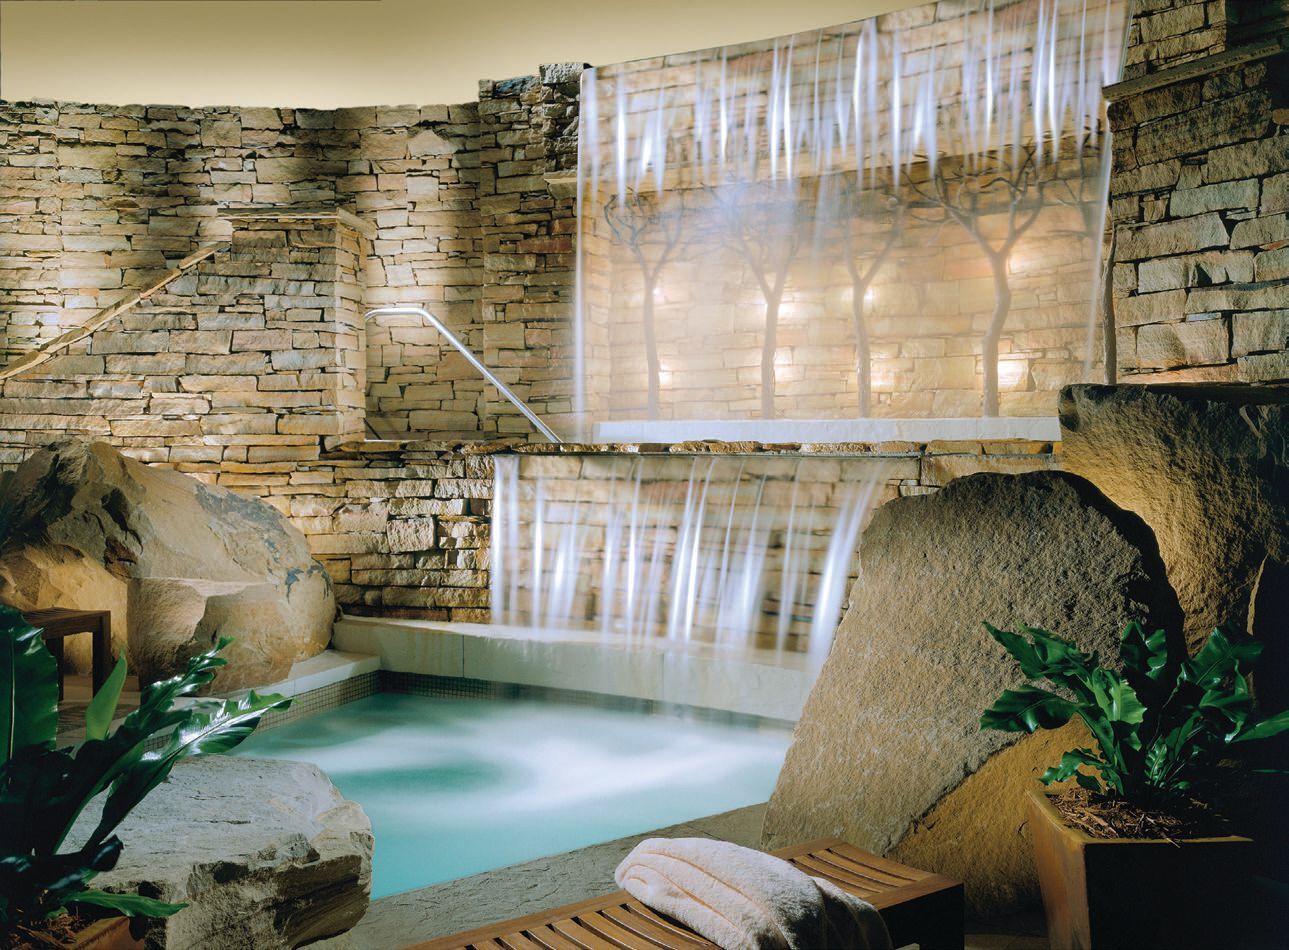 The Aqua Garden features a co-ed soaking pool with heated Hydromassage WaterWalls PHOTO COURTESY OF THE BRAND